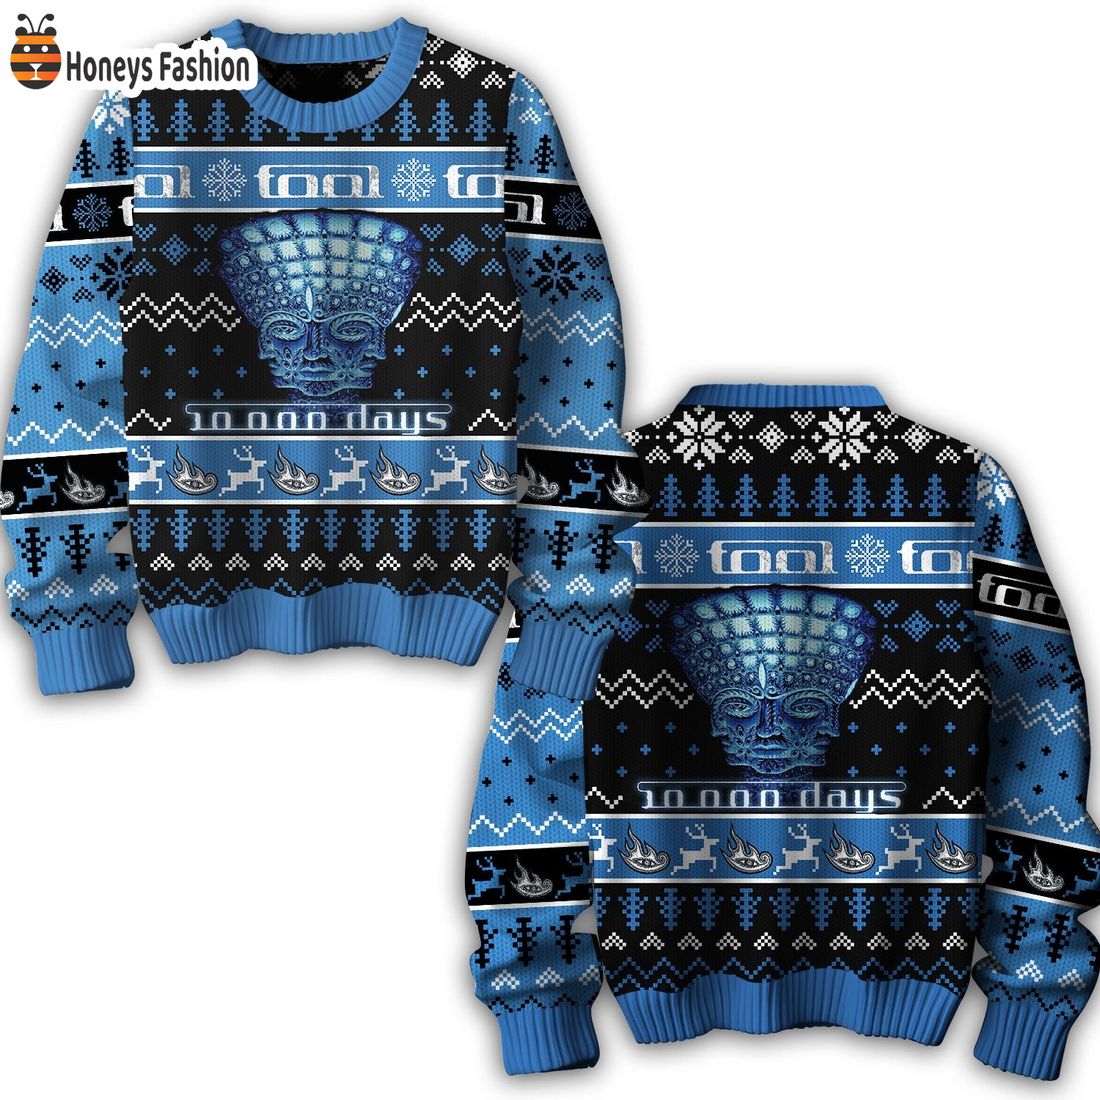 Tool 10 000 Days Albums Ugly Sweater